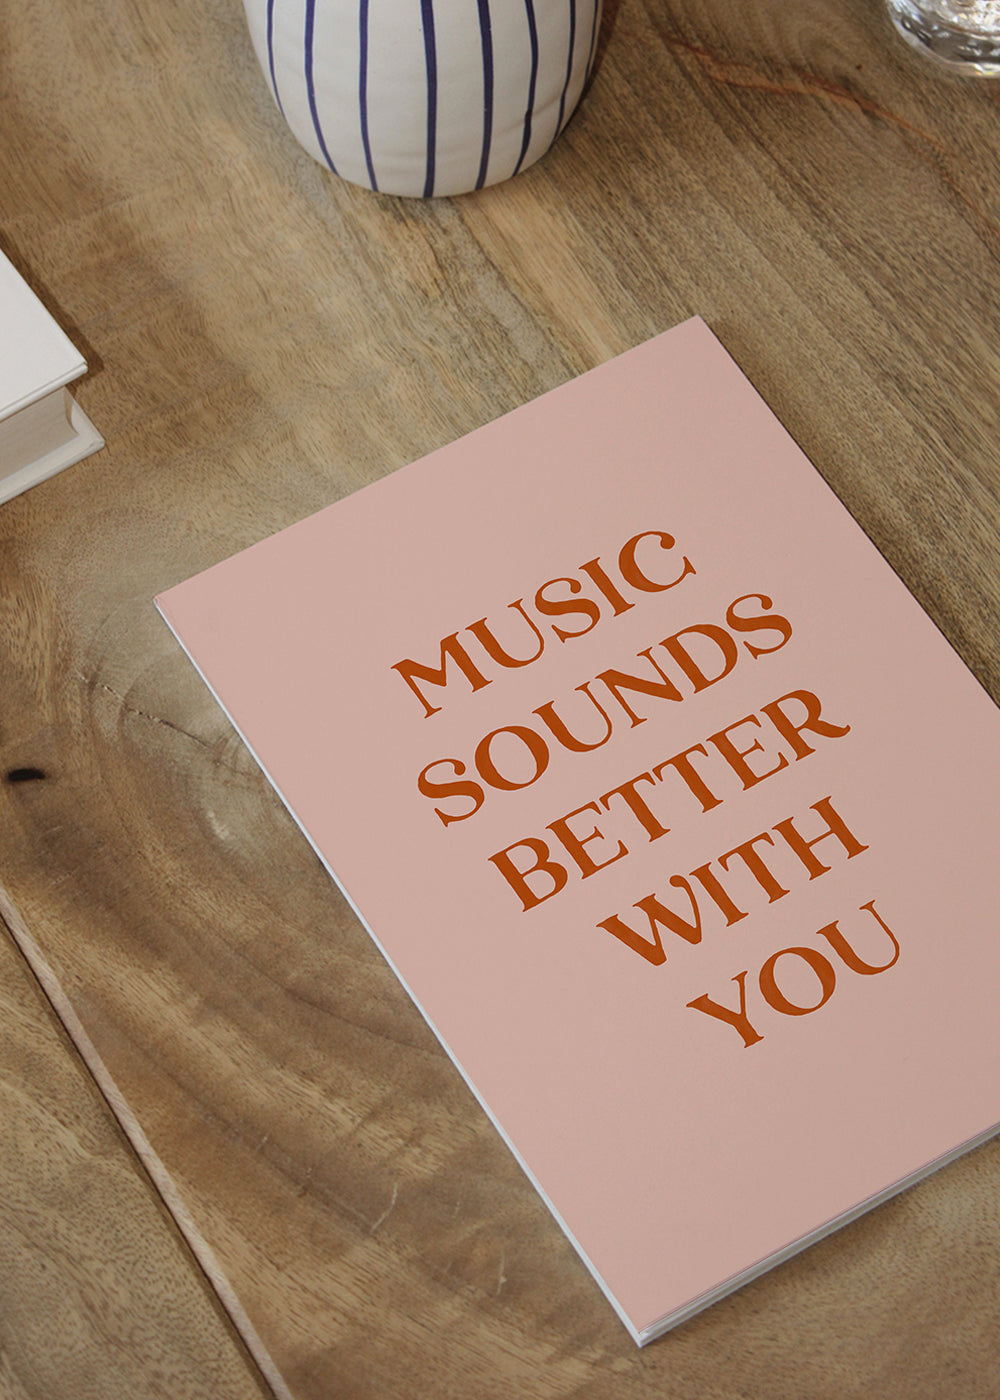 Music sounds better with you